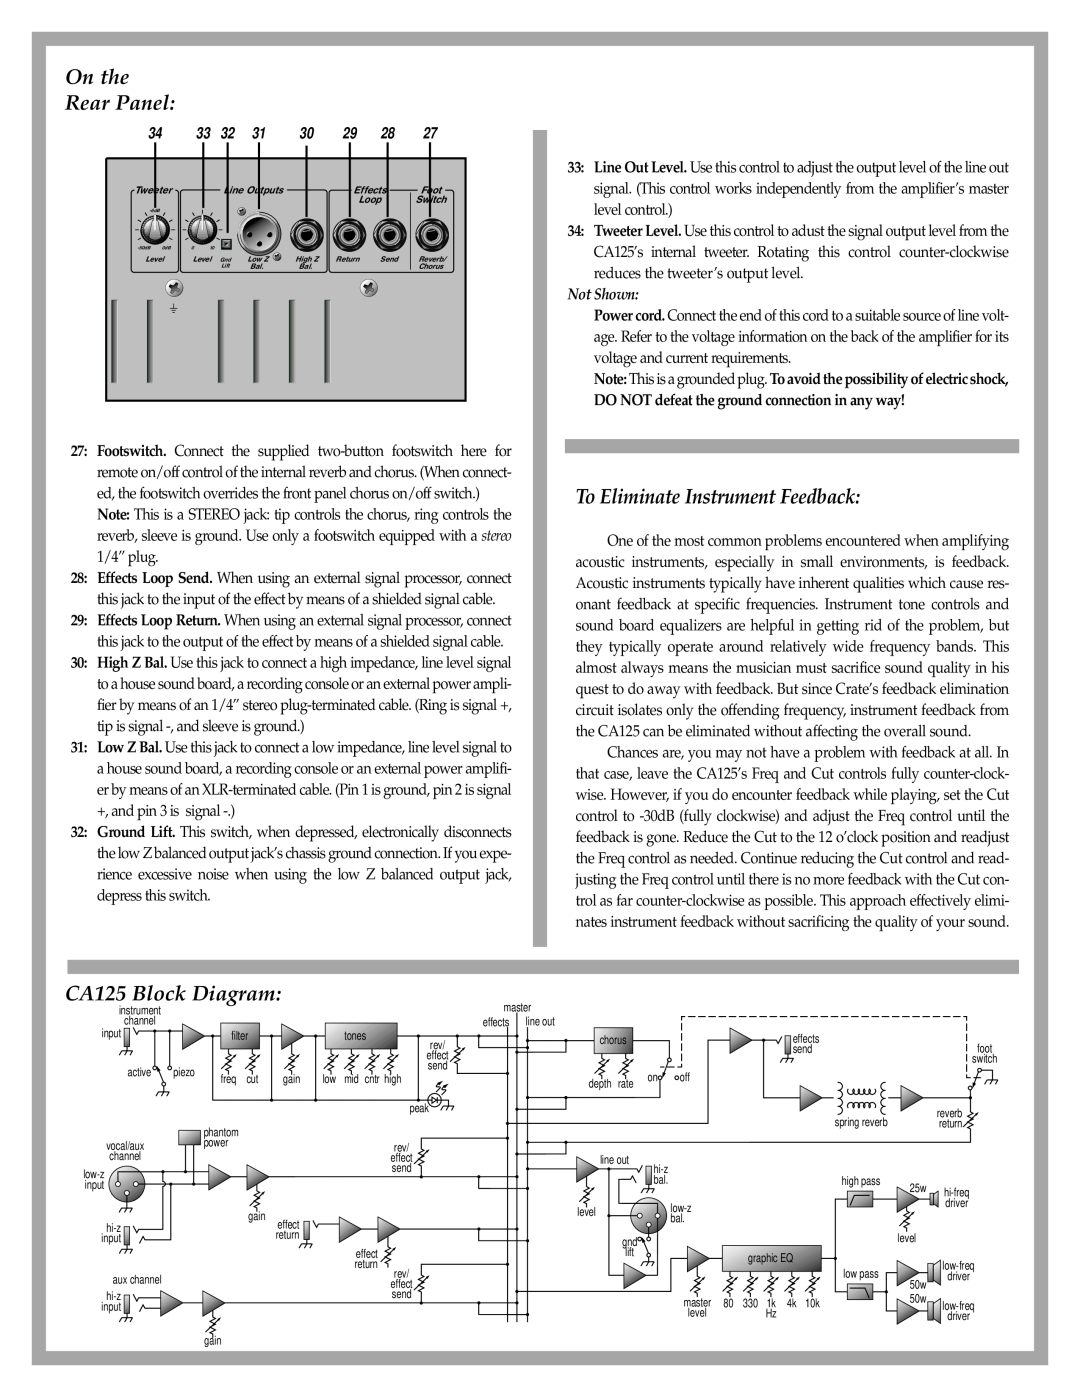 Crate Amplifiers manual On the Rear Panel, To Eliminate Instrument Feedback, CA125 Block Diagram, Not Shown 